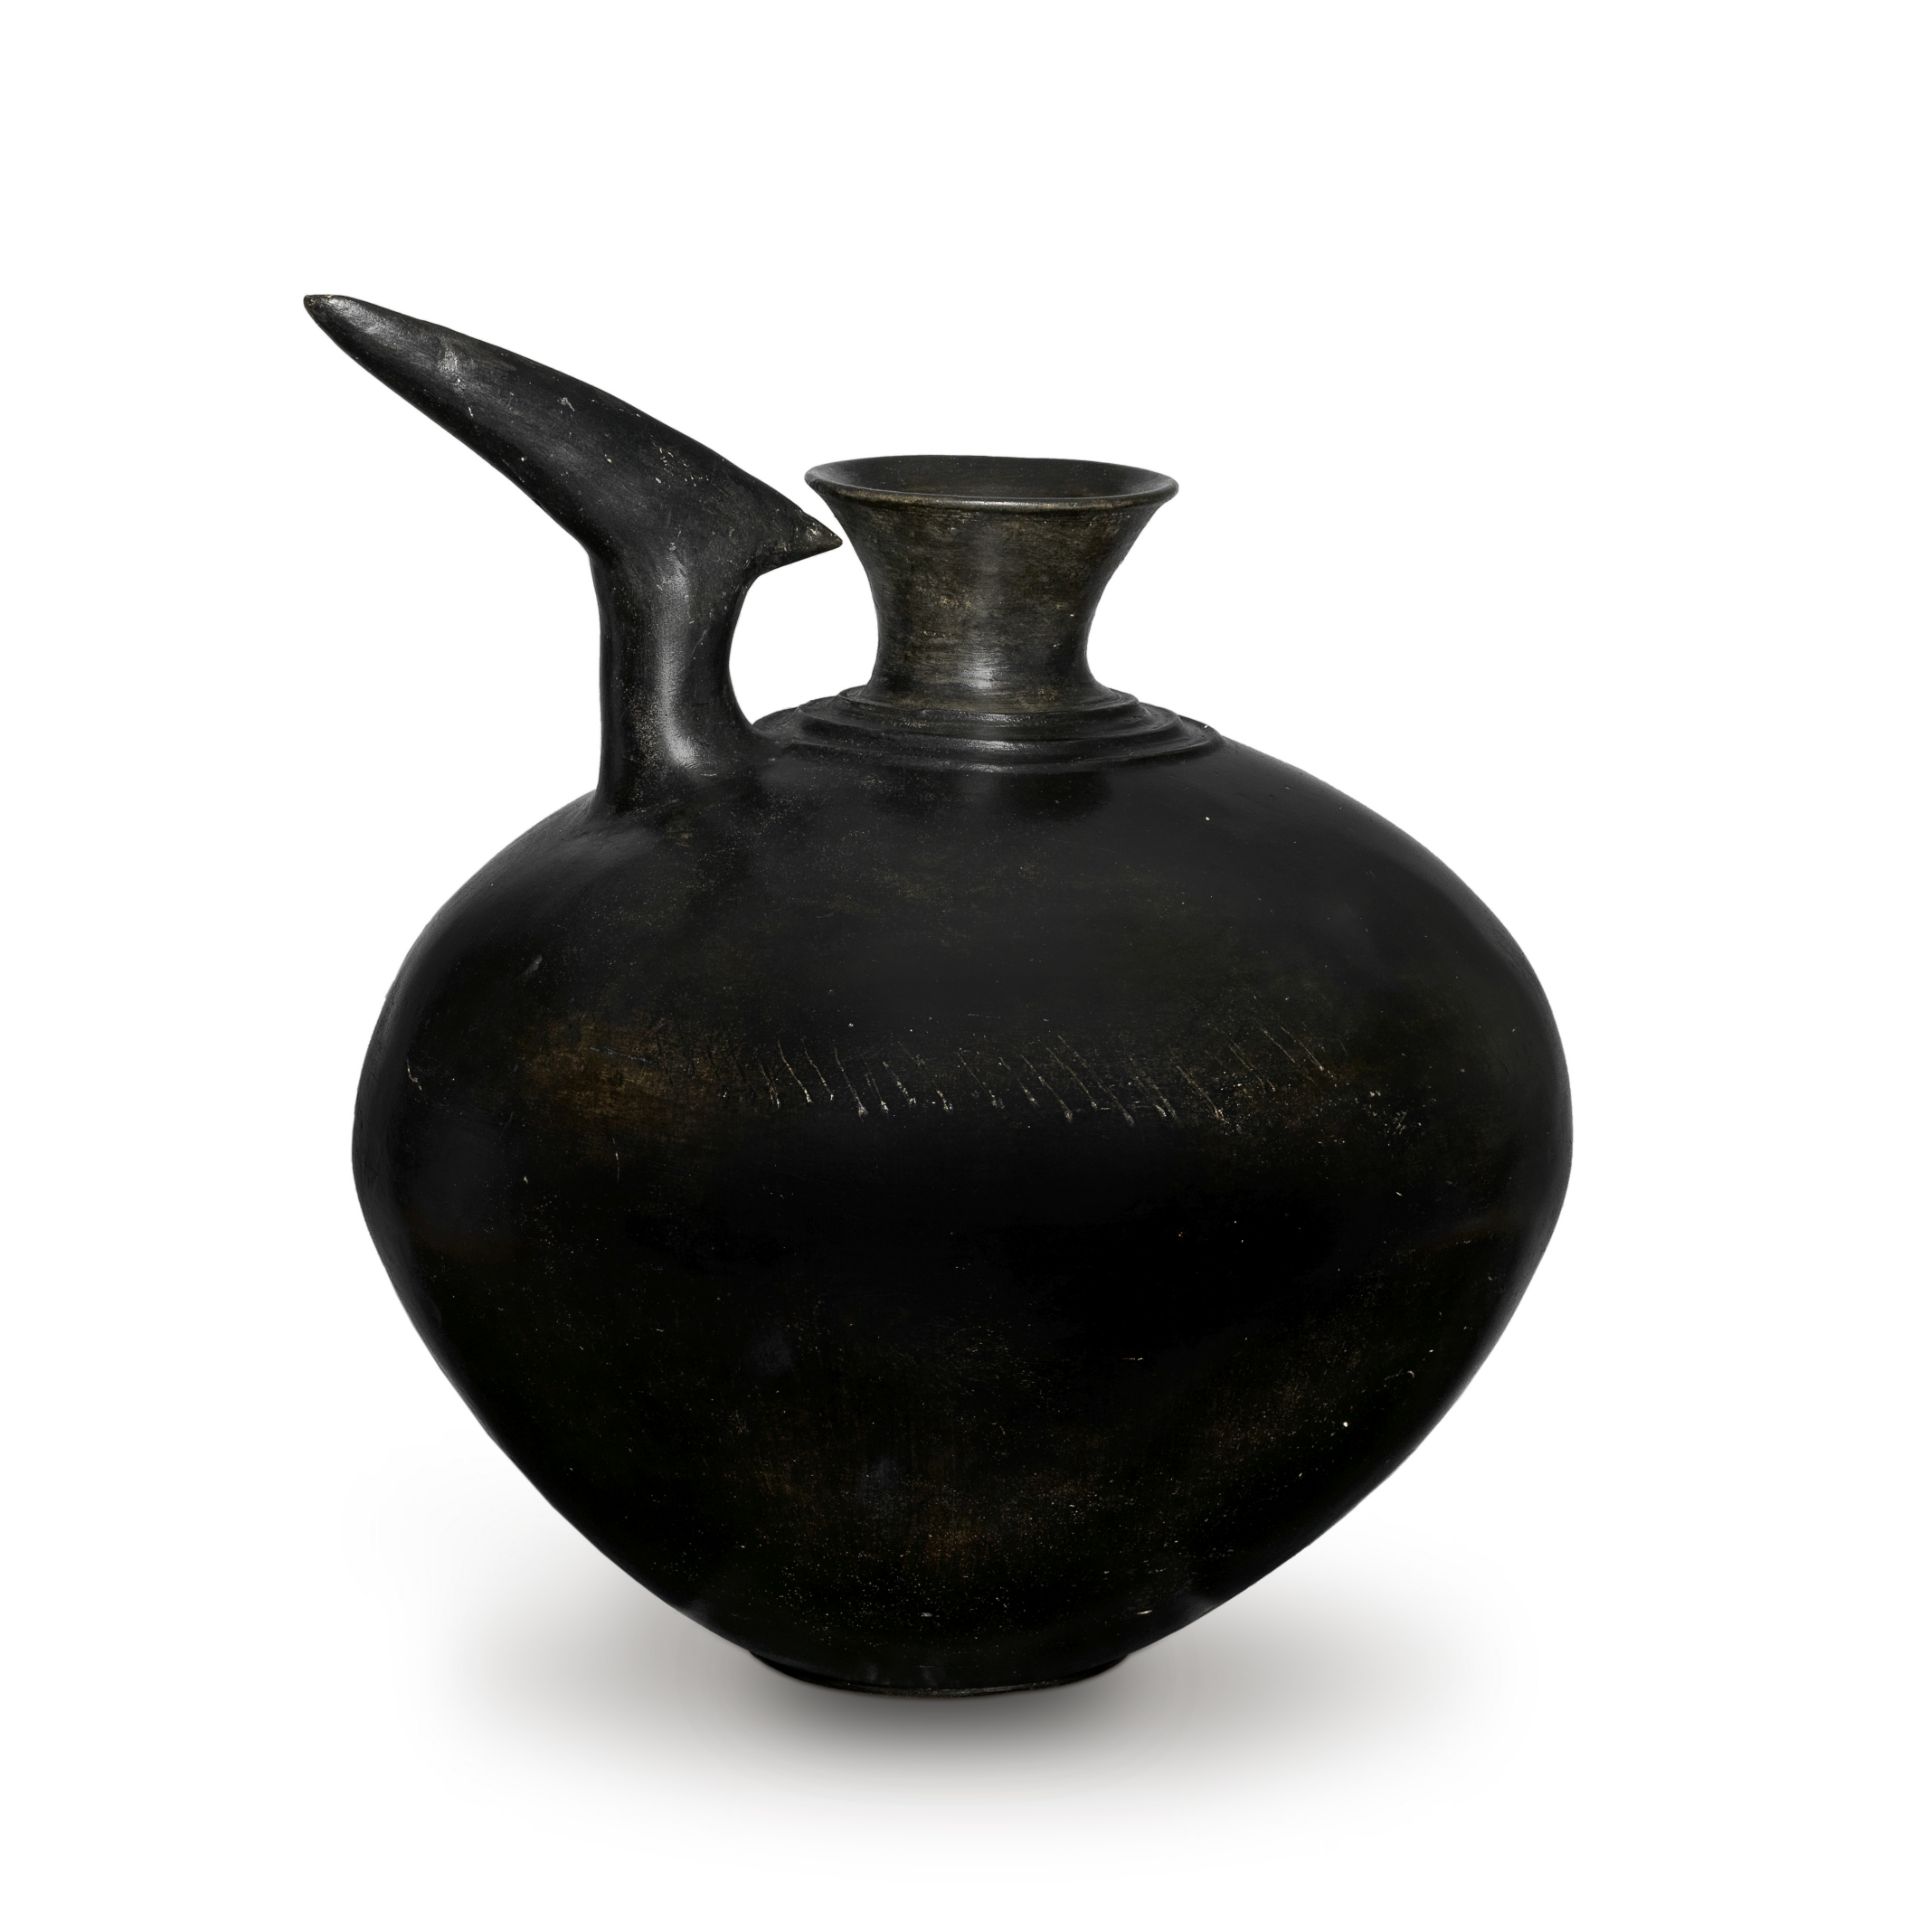 A large Iranian burnished black ware pottery spouted vessel